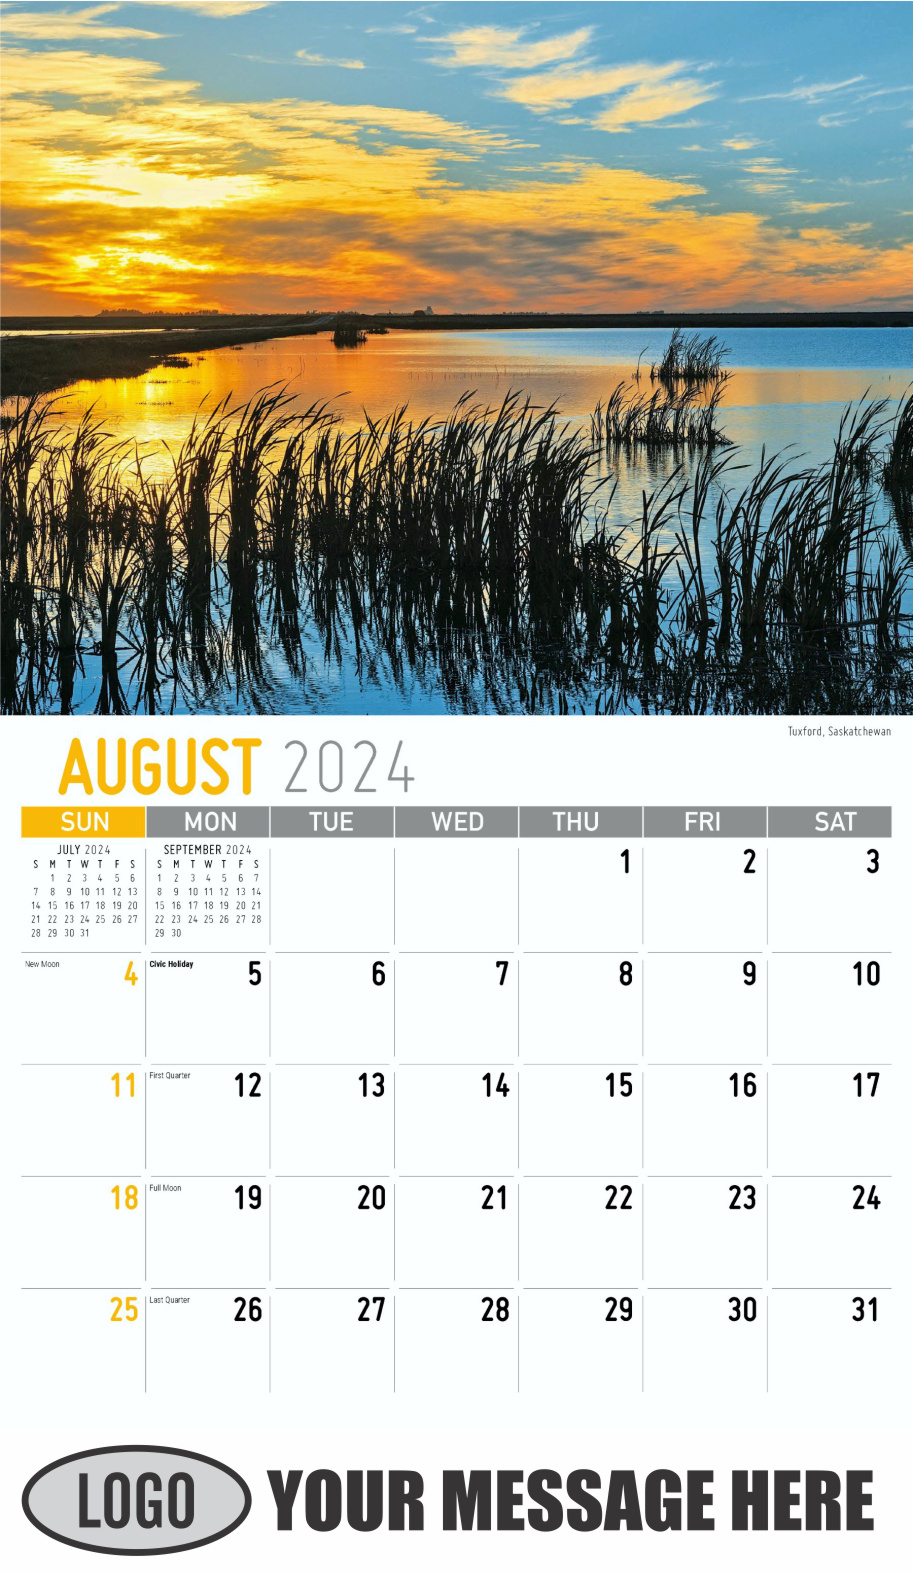 Scenes of Western Canada 2024 Business Promotional Wall Calendar - August